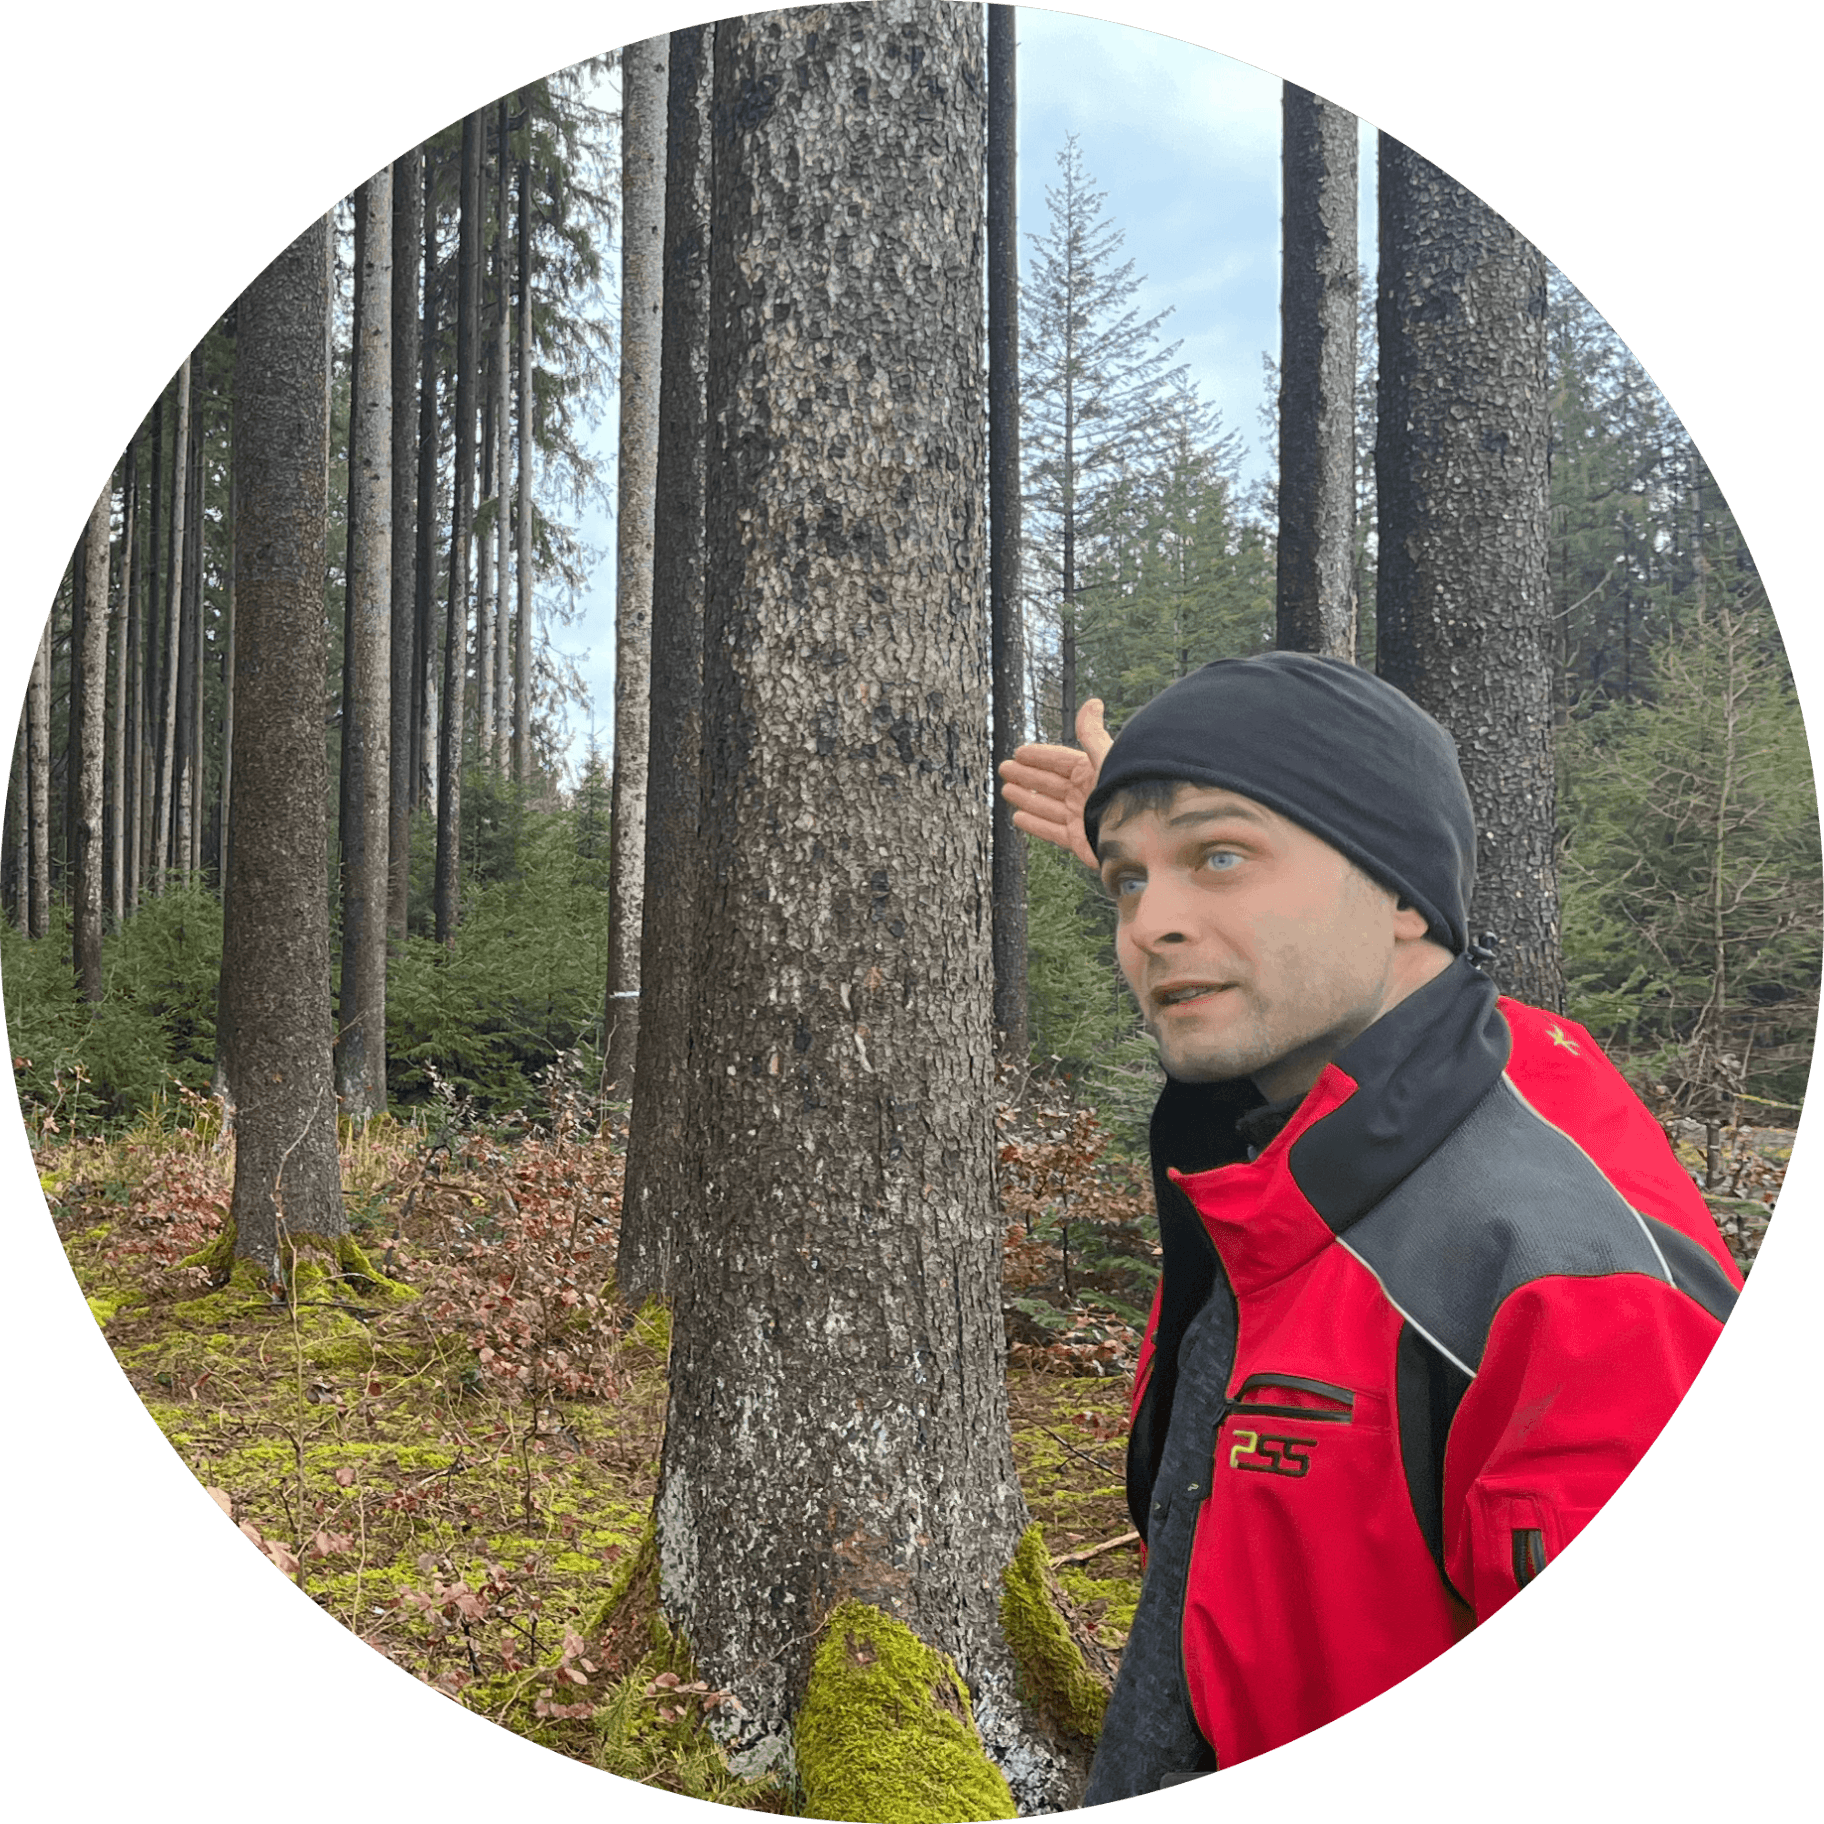 A forester explaining his approach standing in the forest.